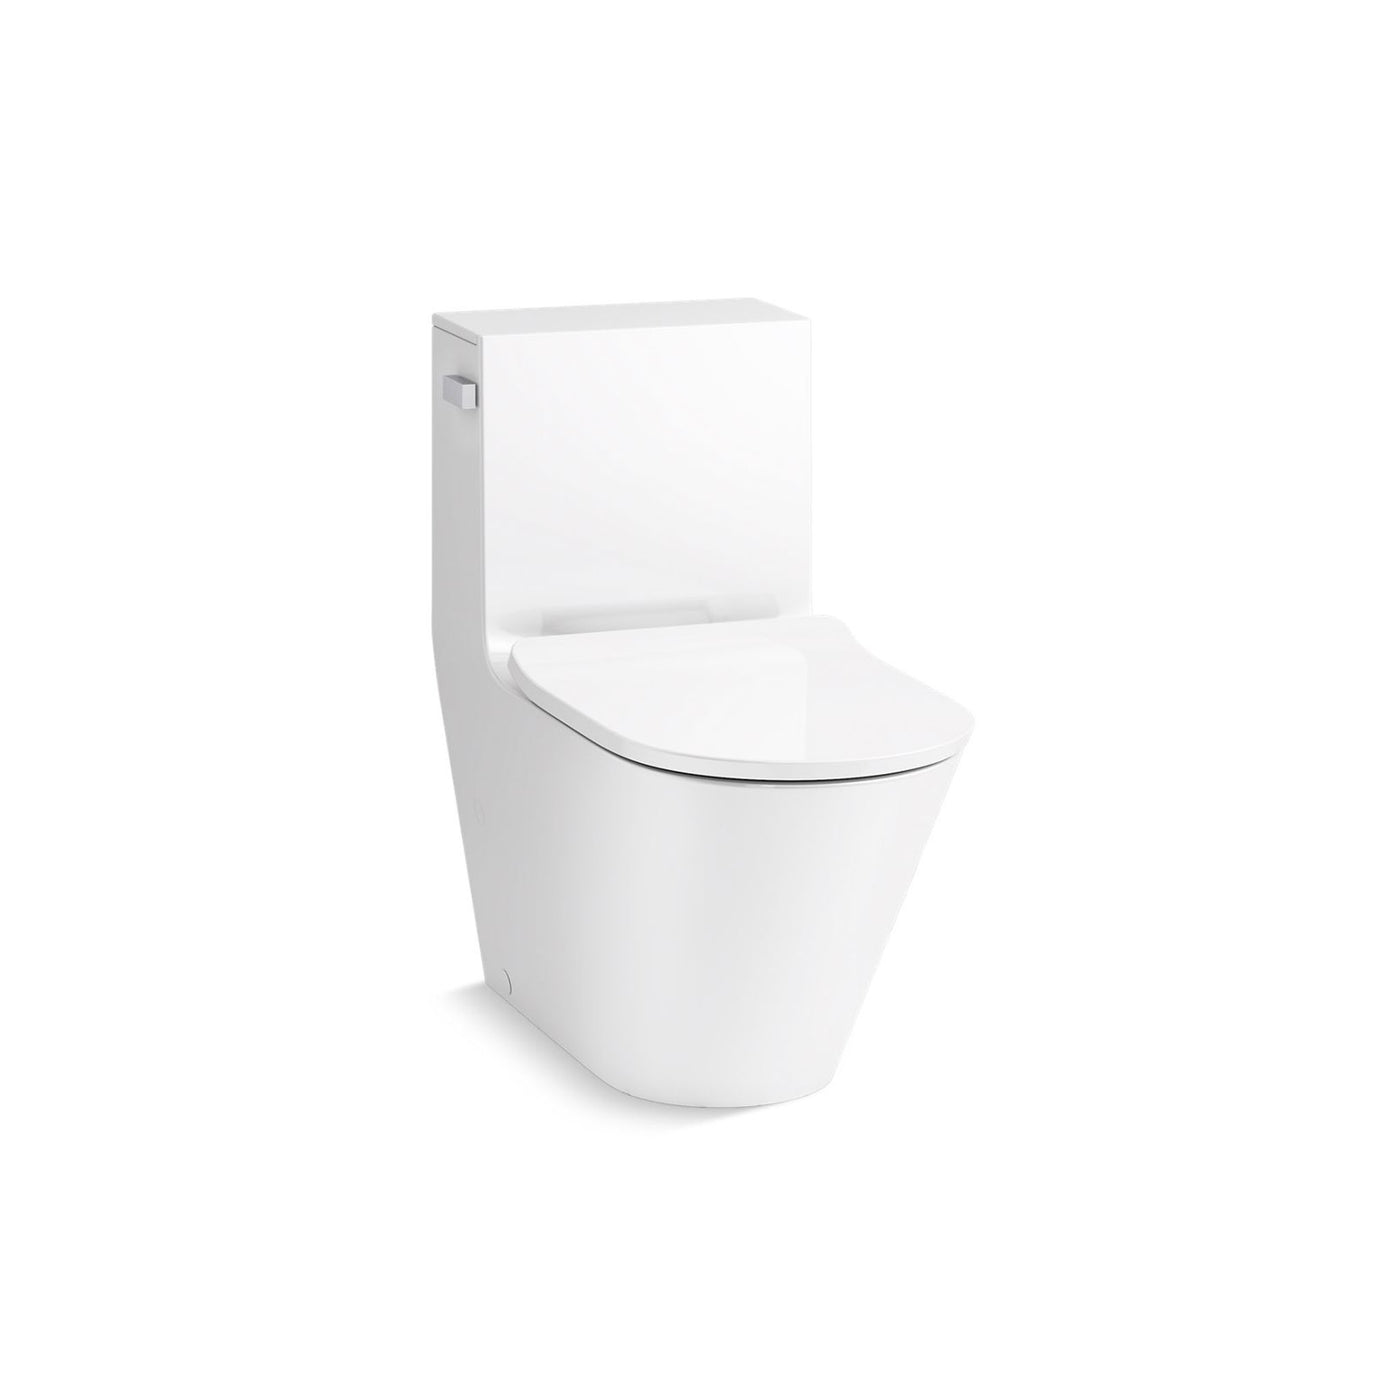 Brazn® One-piece compact elongated toilet with skirted trapway, dual-flush